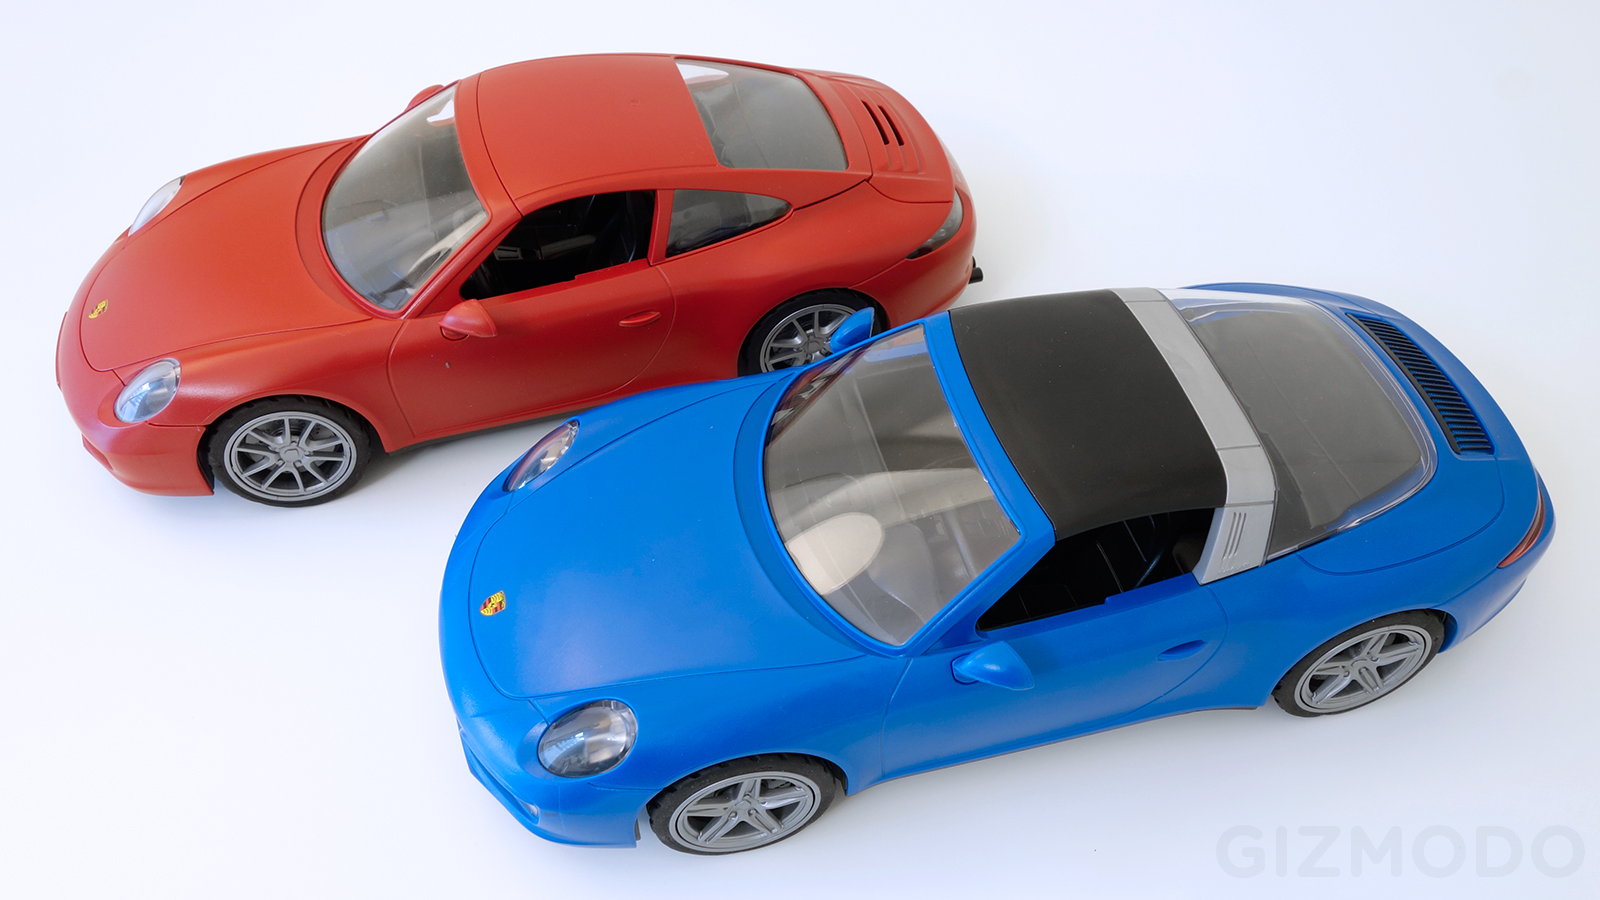 The Best Car Reveal This Week Might Be Playmobil’s Gorgeous New Porsche 911 Targa 4S